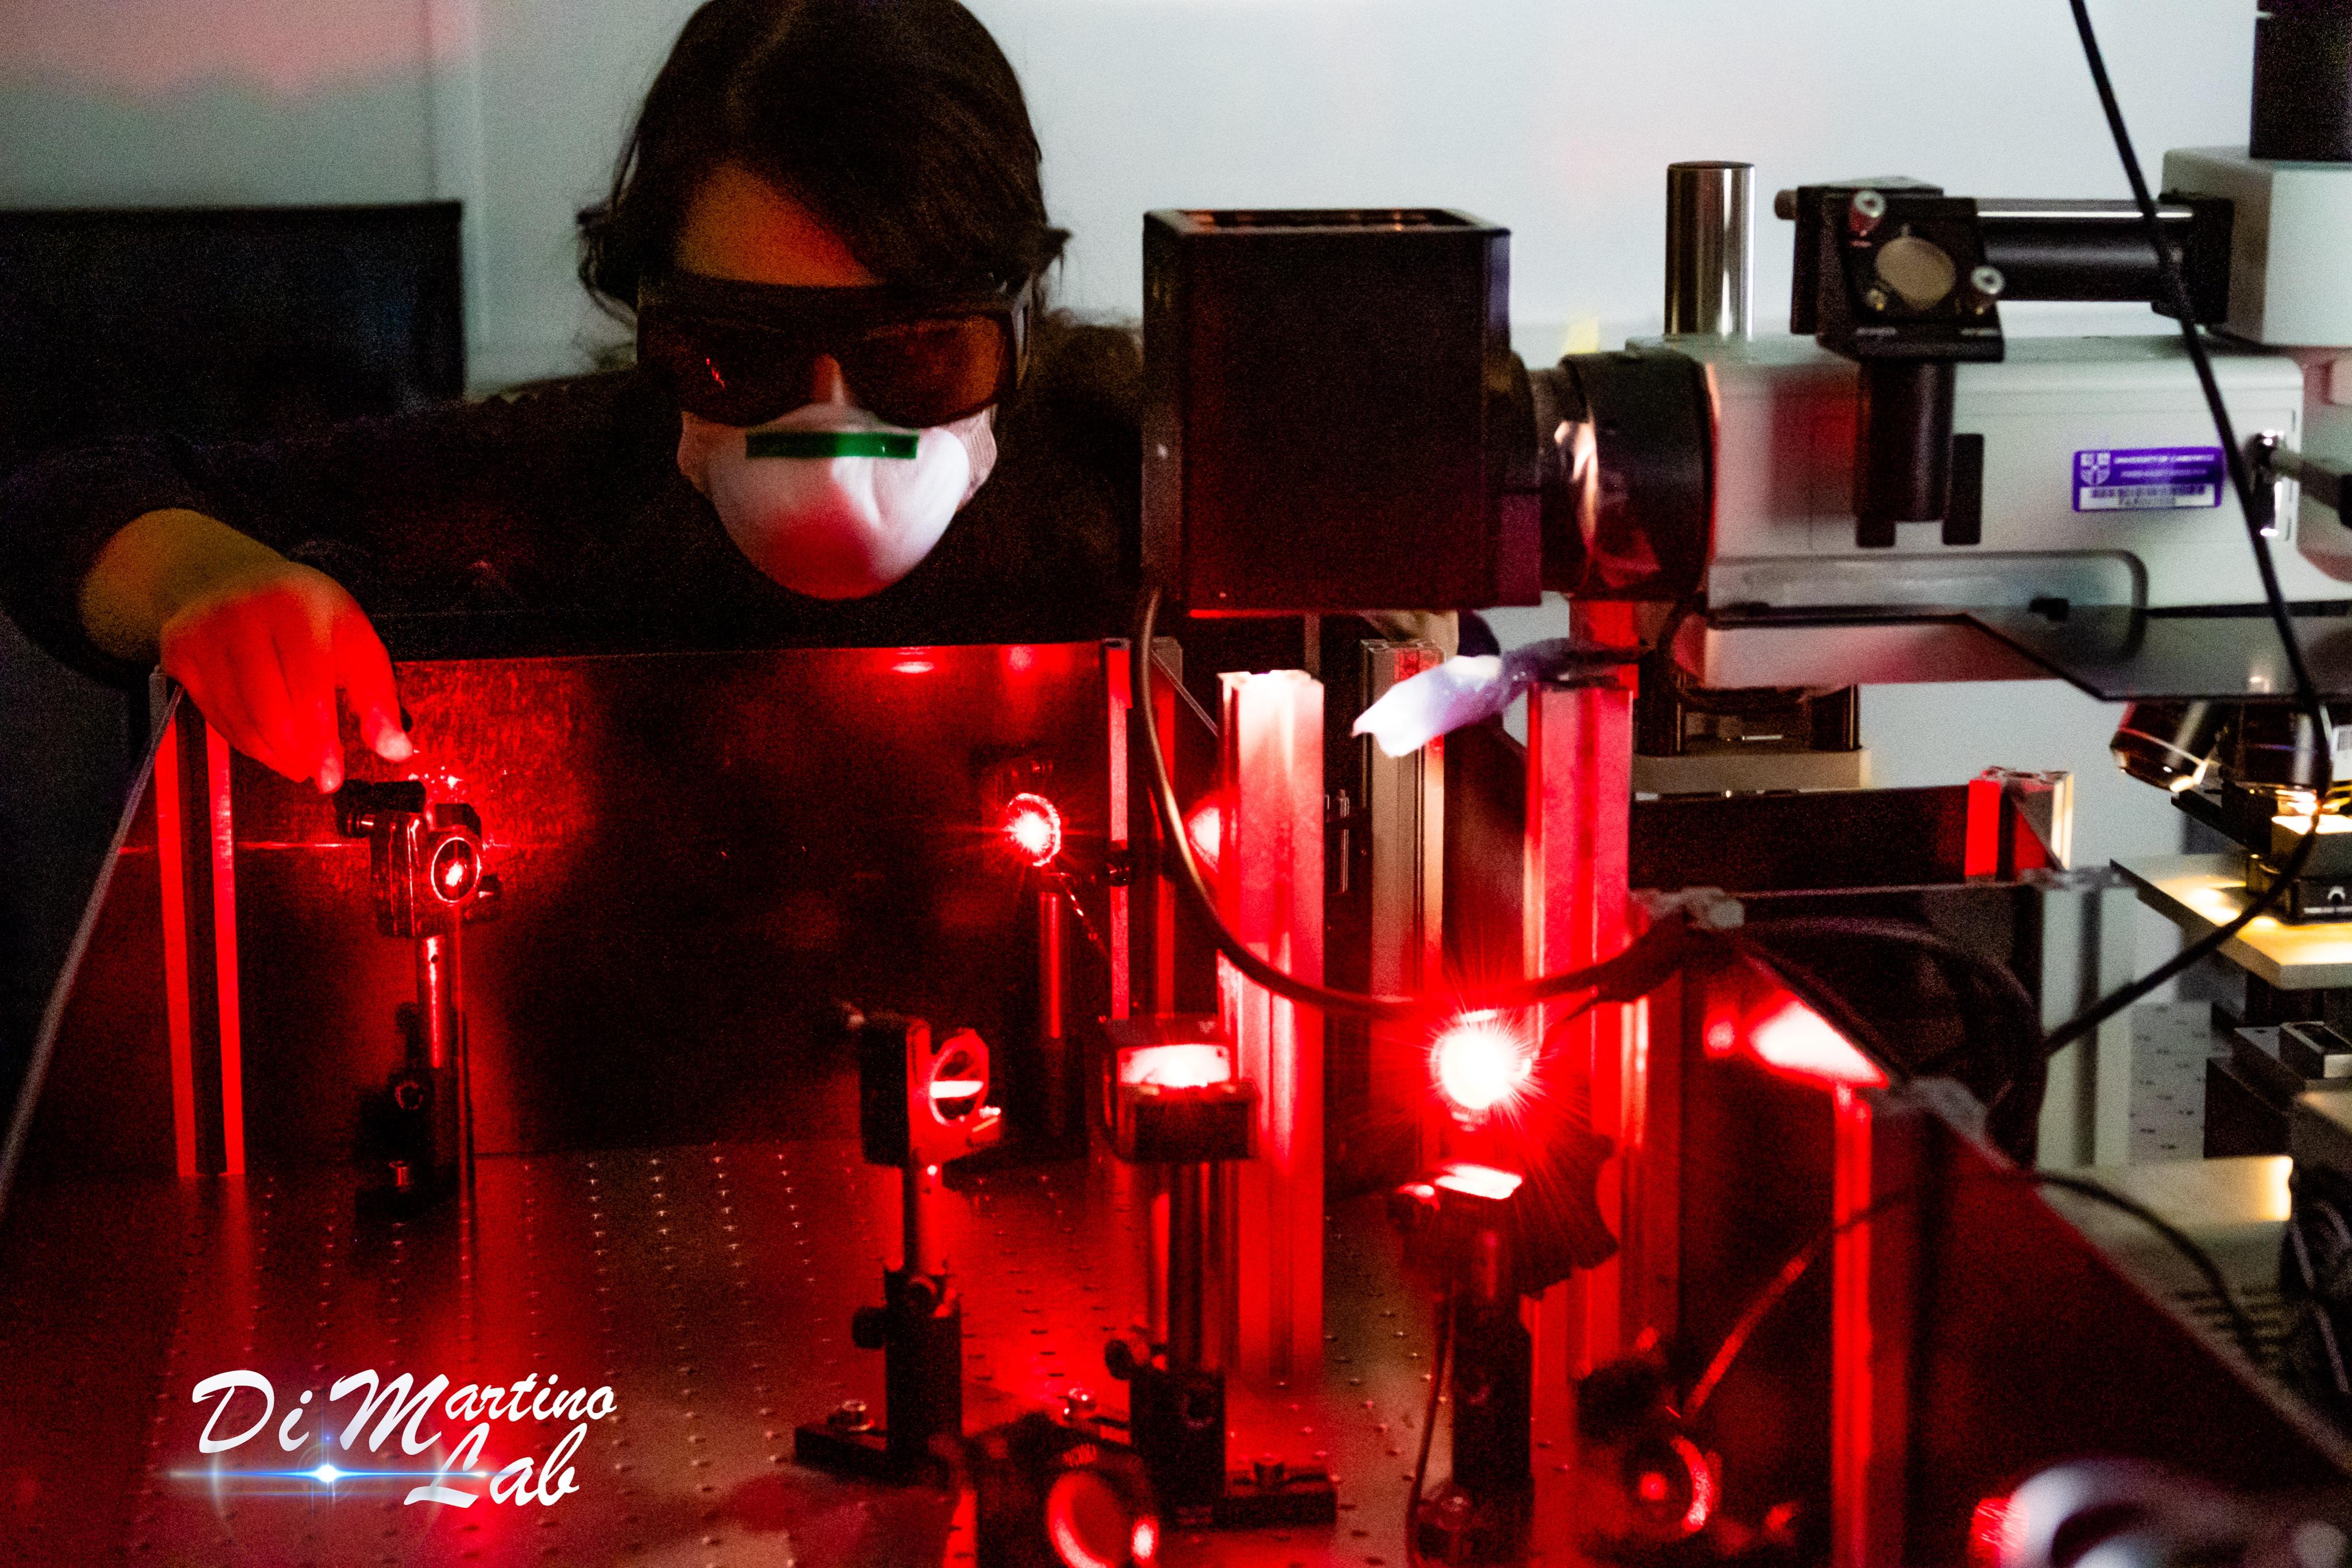 Aligning Lasers in the Di Martino Lab